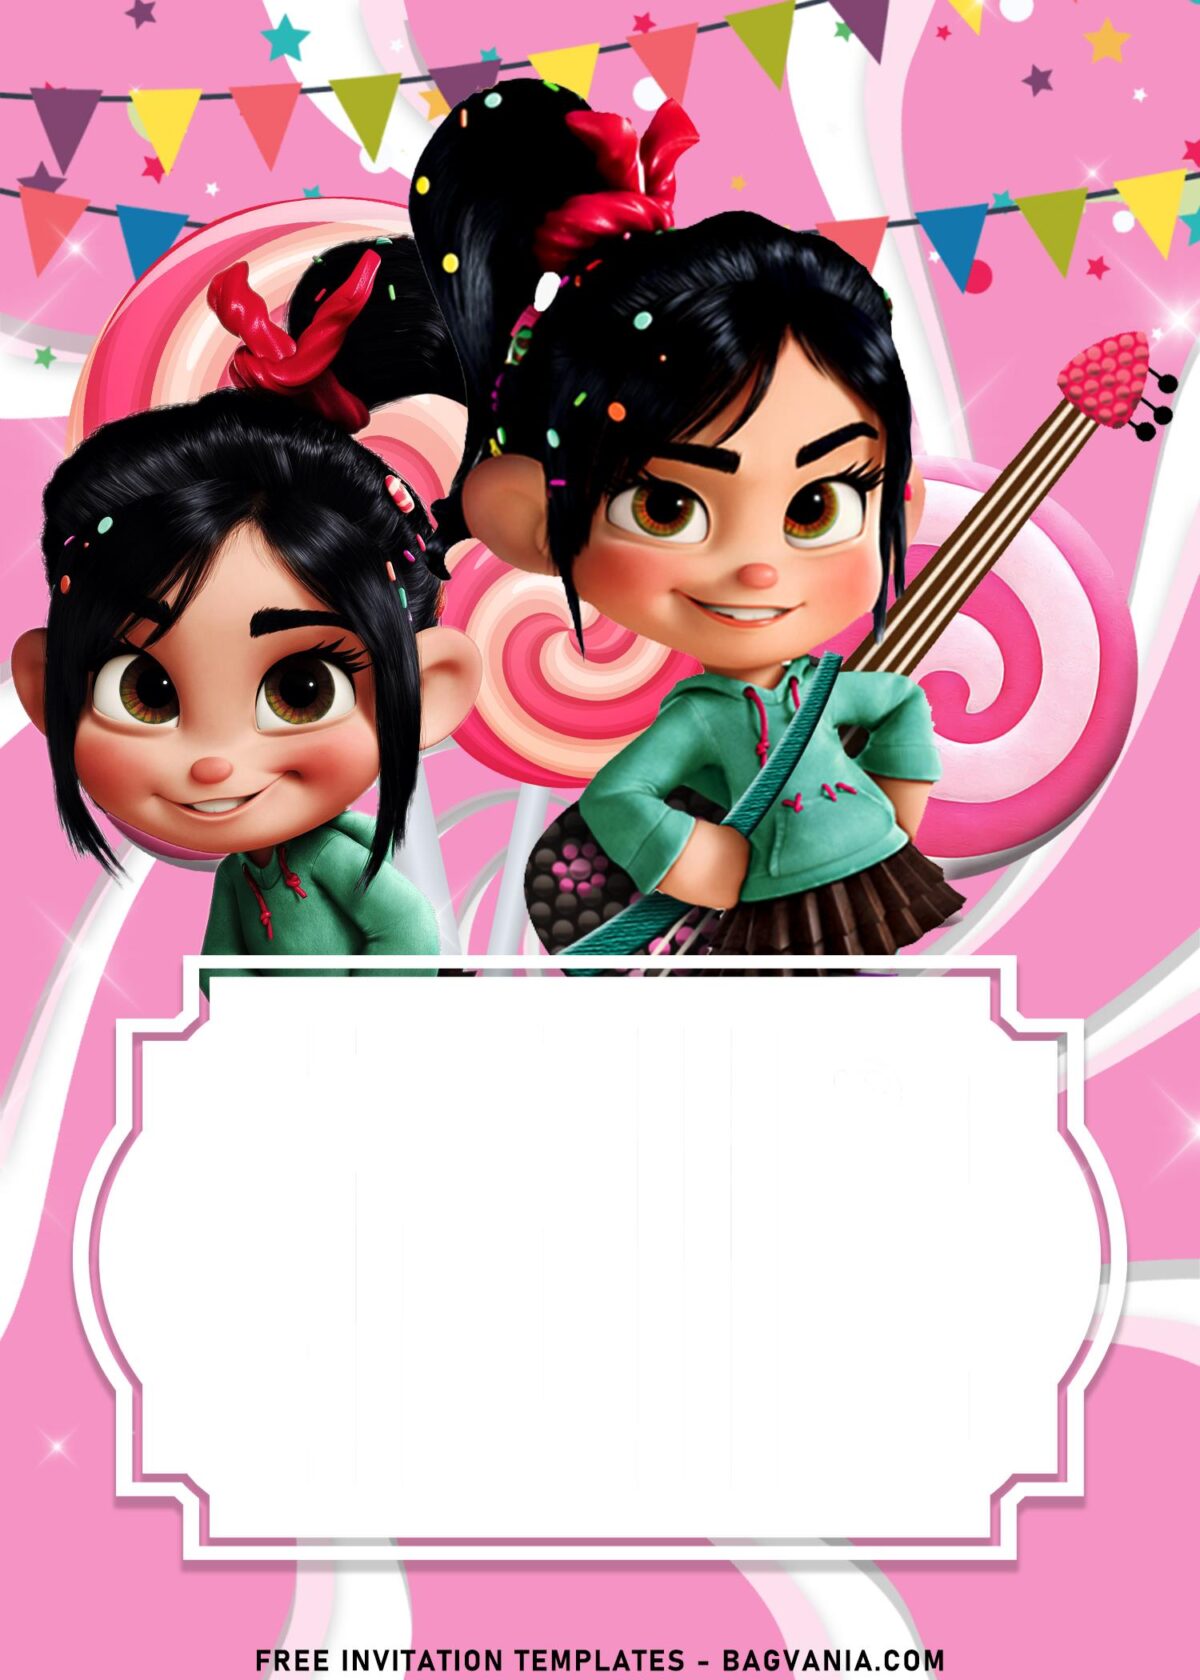 9+ Girly Vanellope Birthday Invitation Templates Great For All Ages with sweet candy